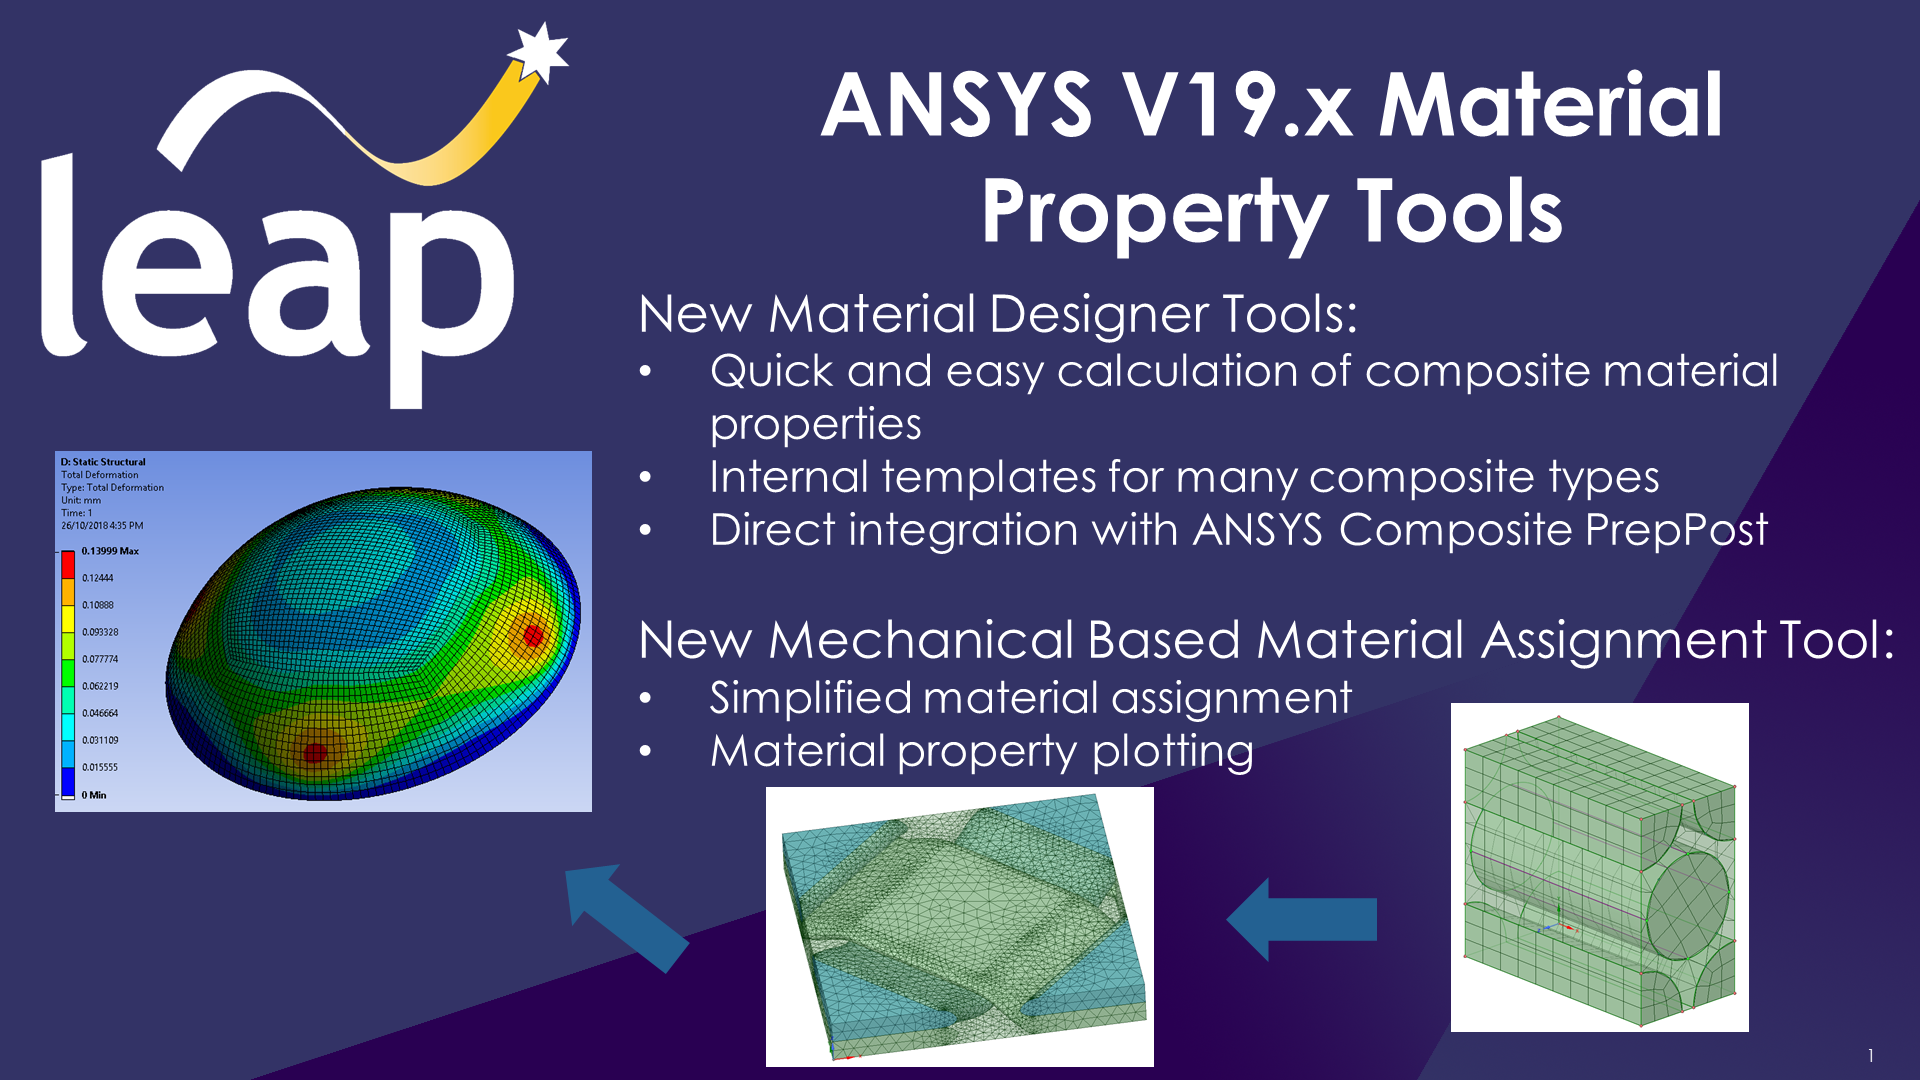 Overview of key improvements in Material Designer & Composite tools in ANSYS 19.x